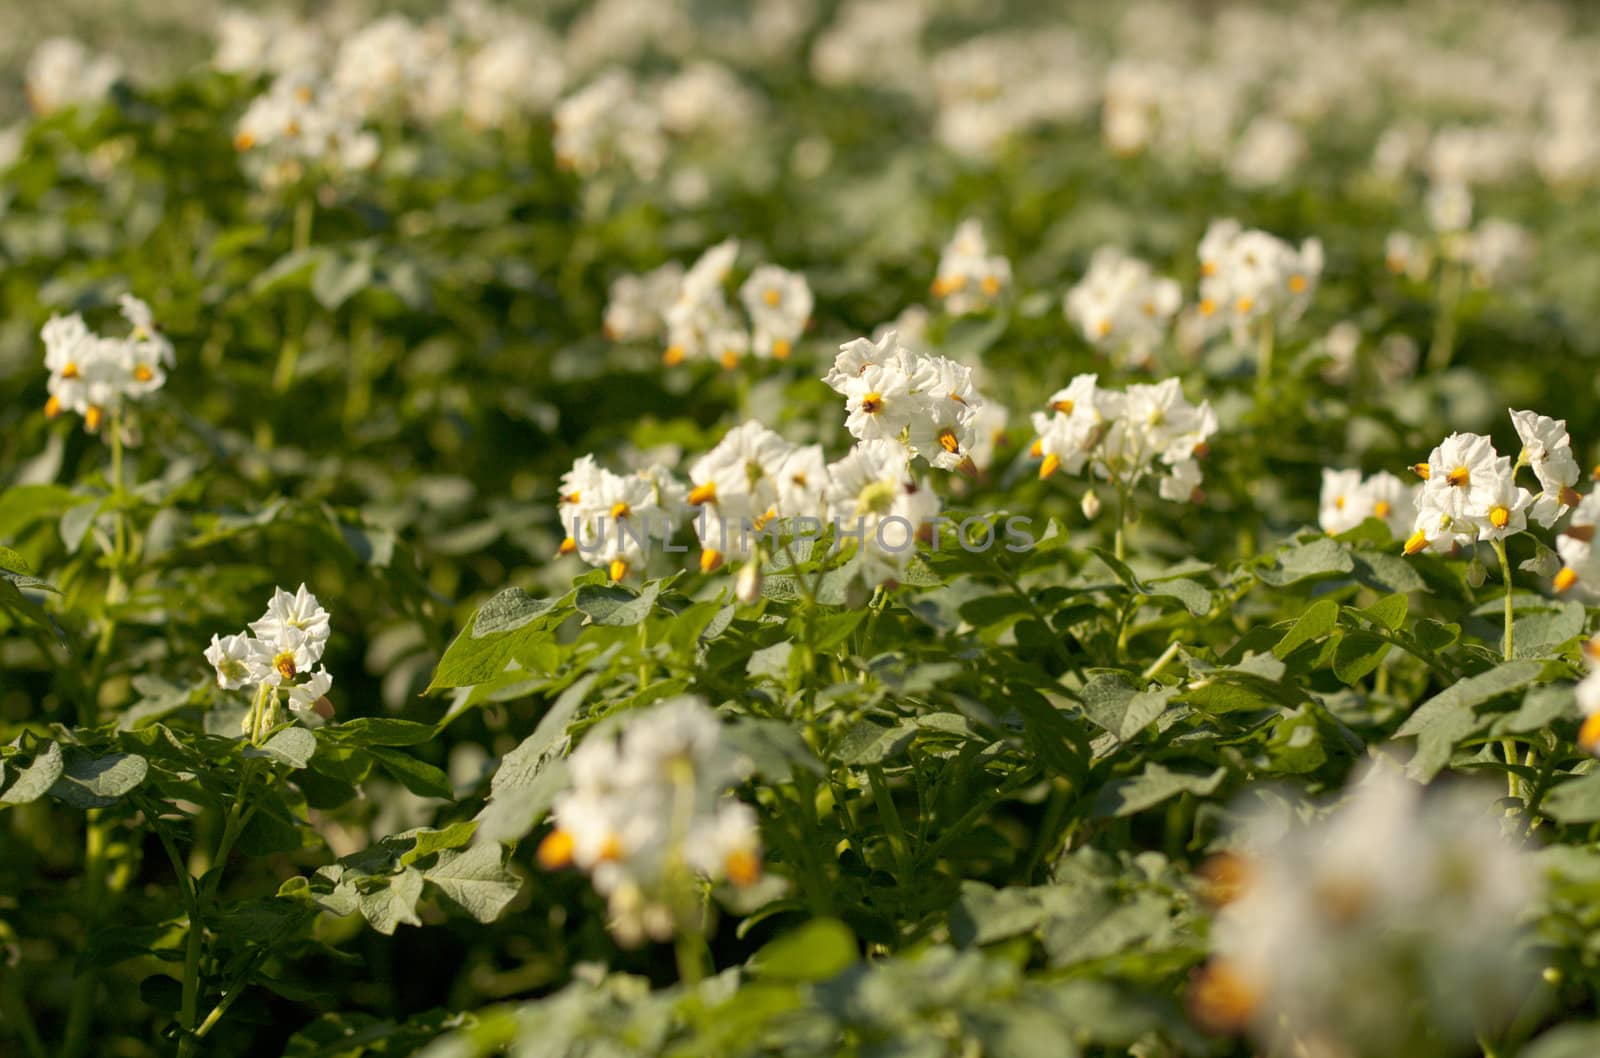 Flowers potatoes with shallow depth of field